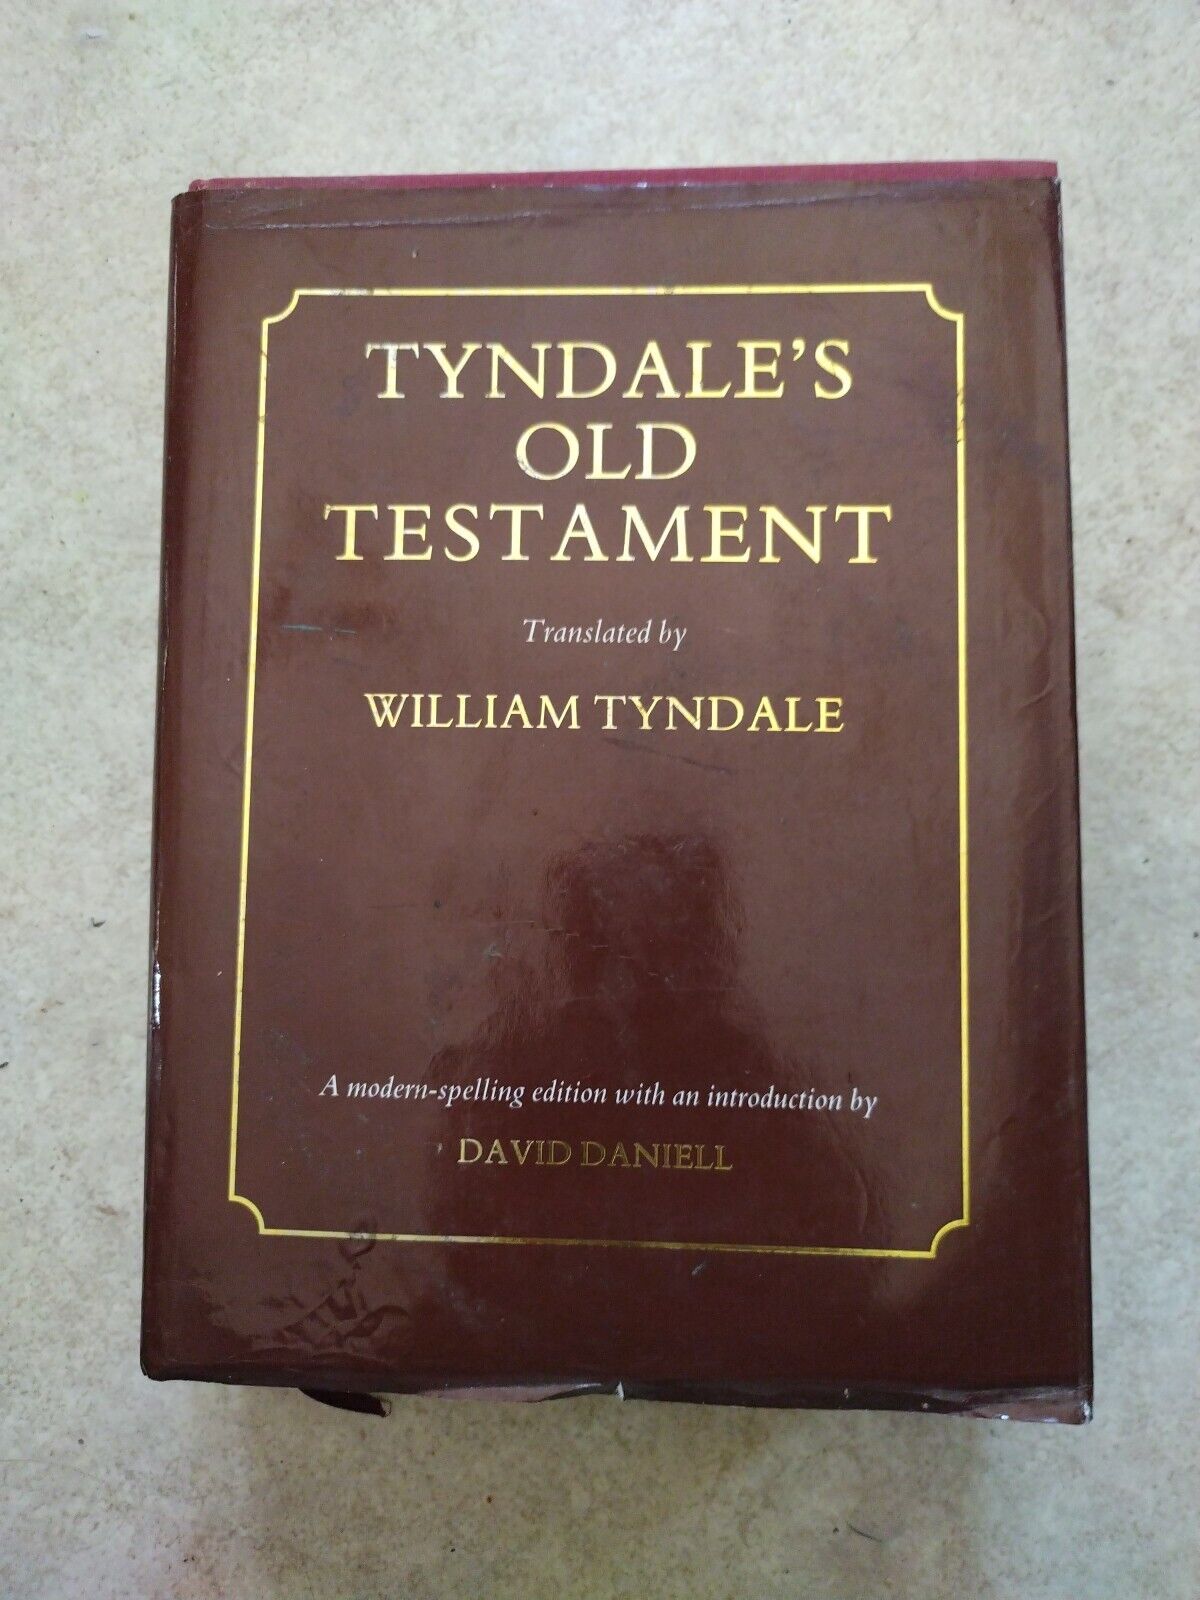 Tyndale's Old Testament: The Pentateuch of 1530, Joshua to 2 Chron of 1537